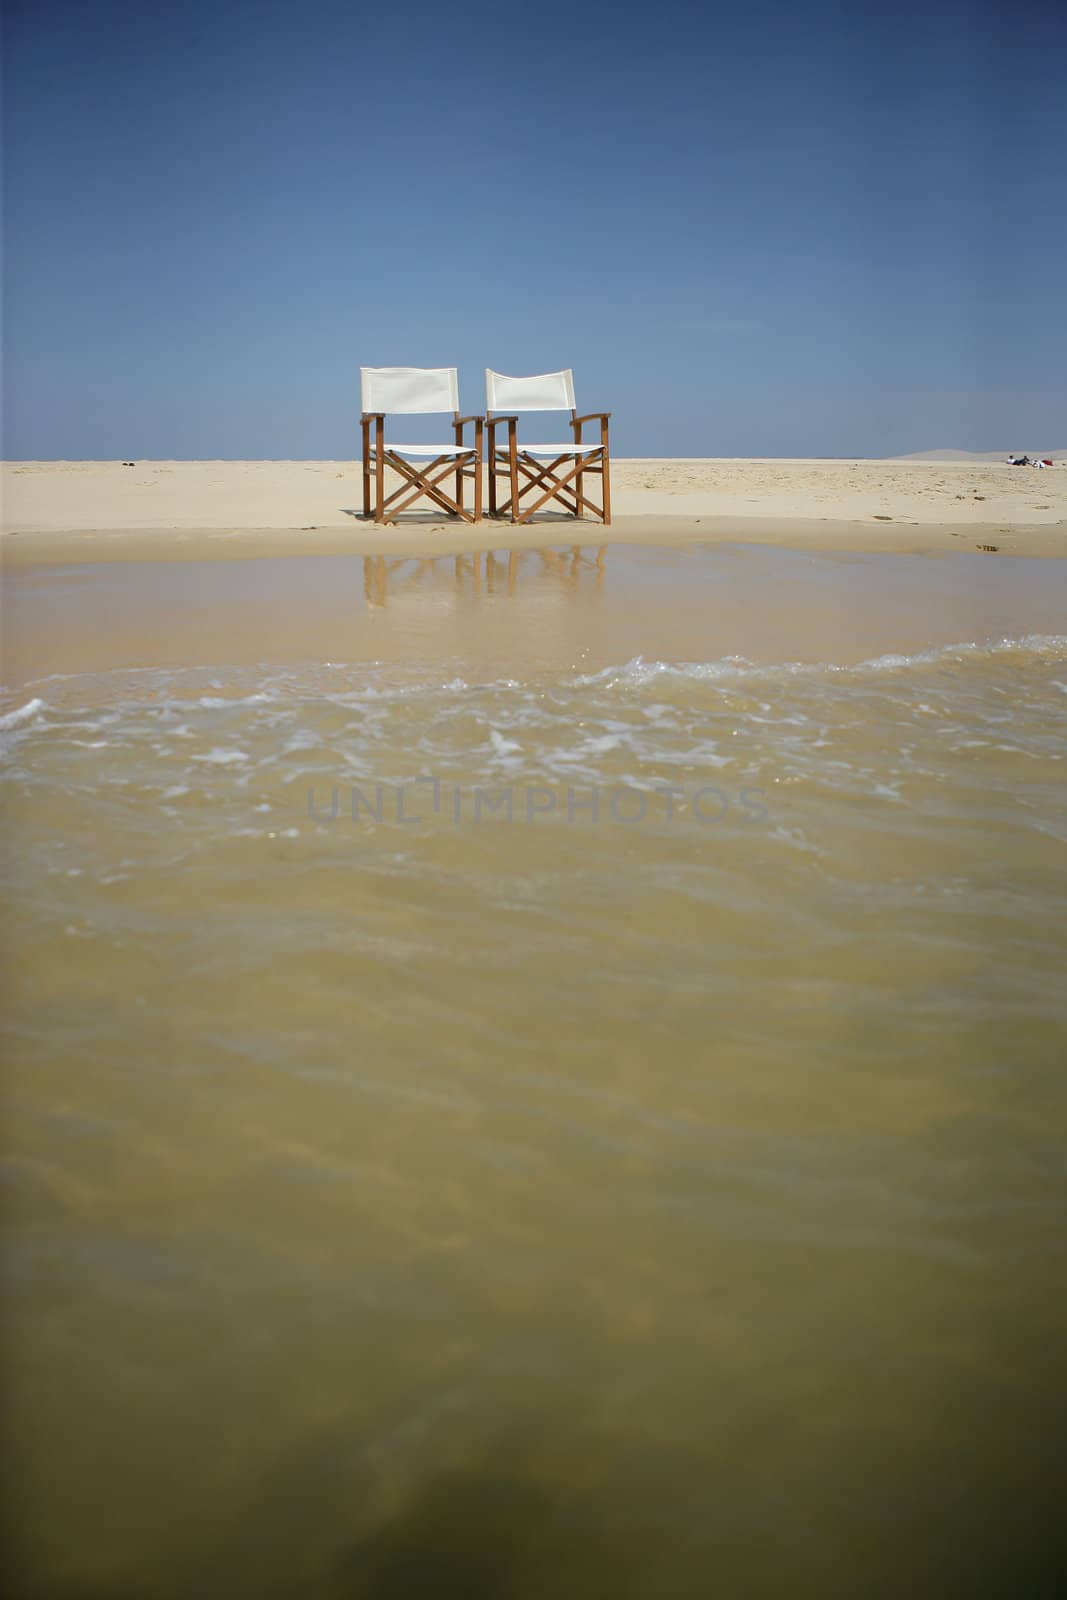 Two director's chairs on a beach by phovoir